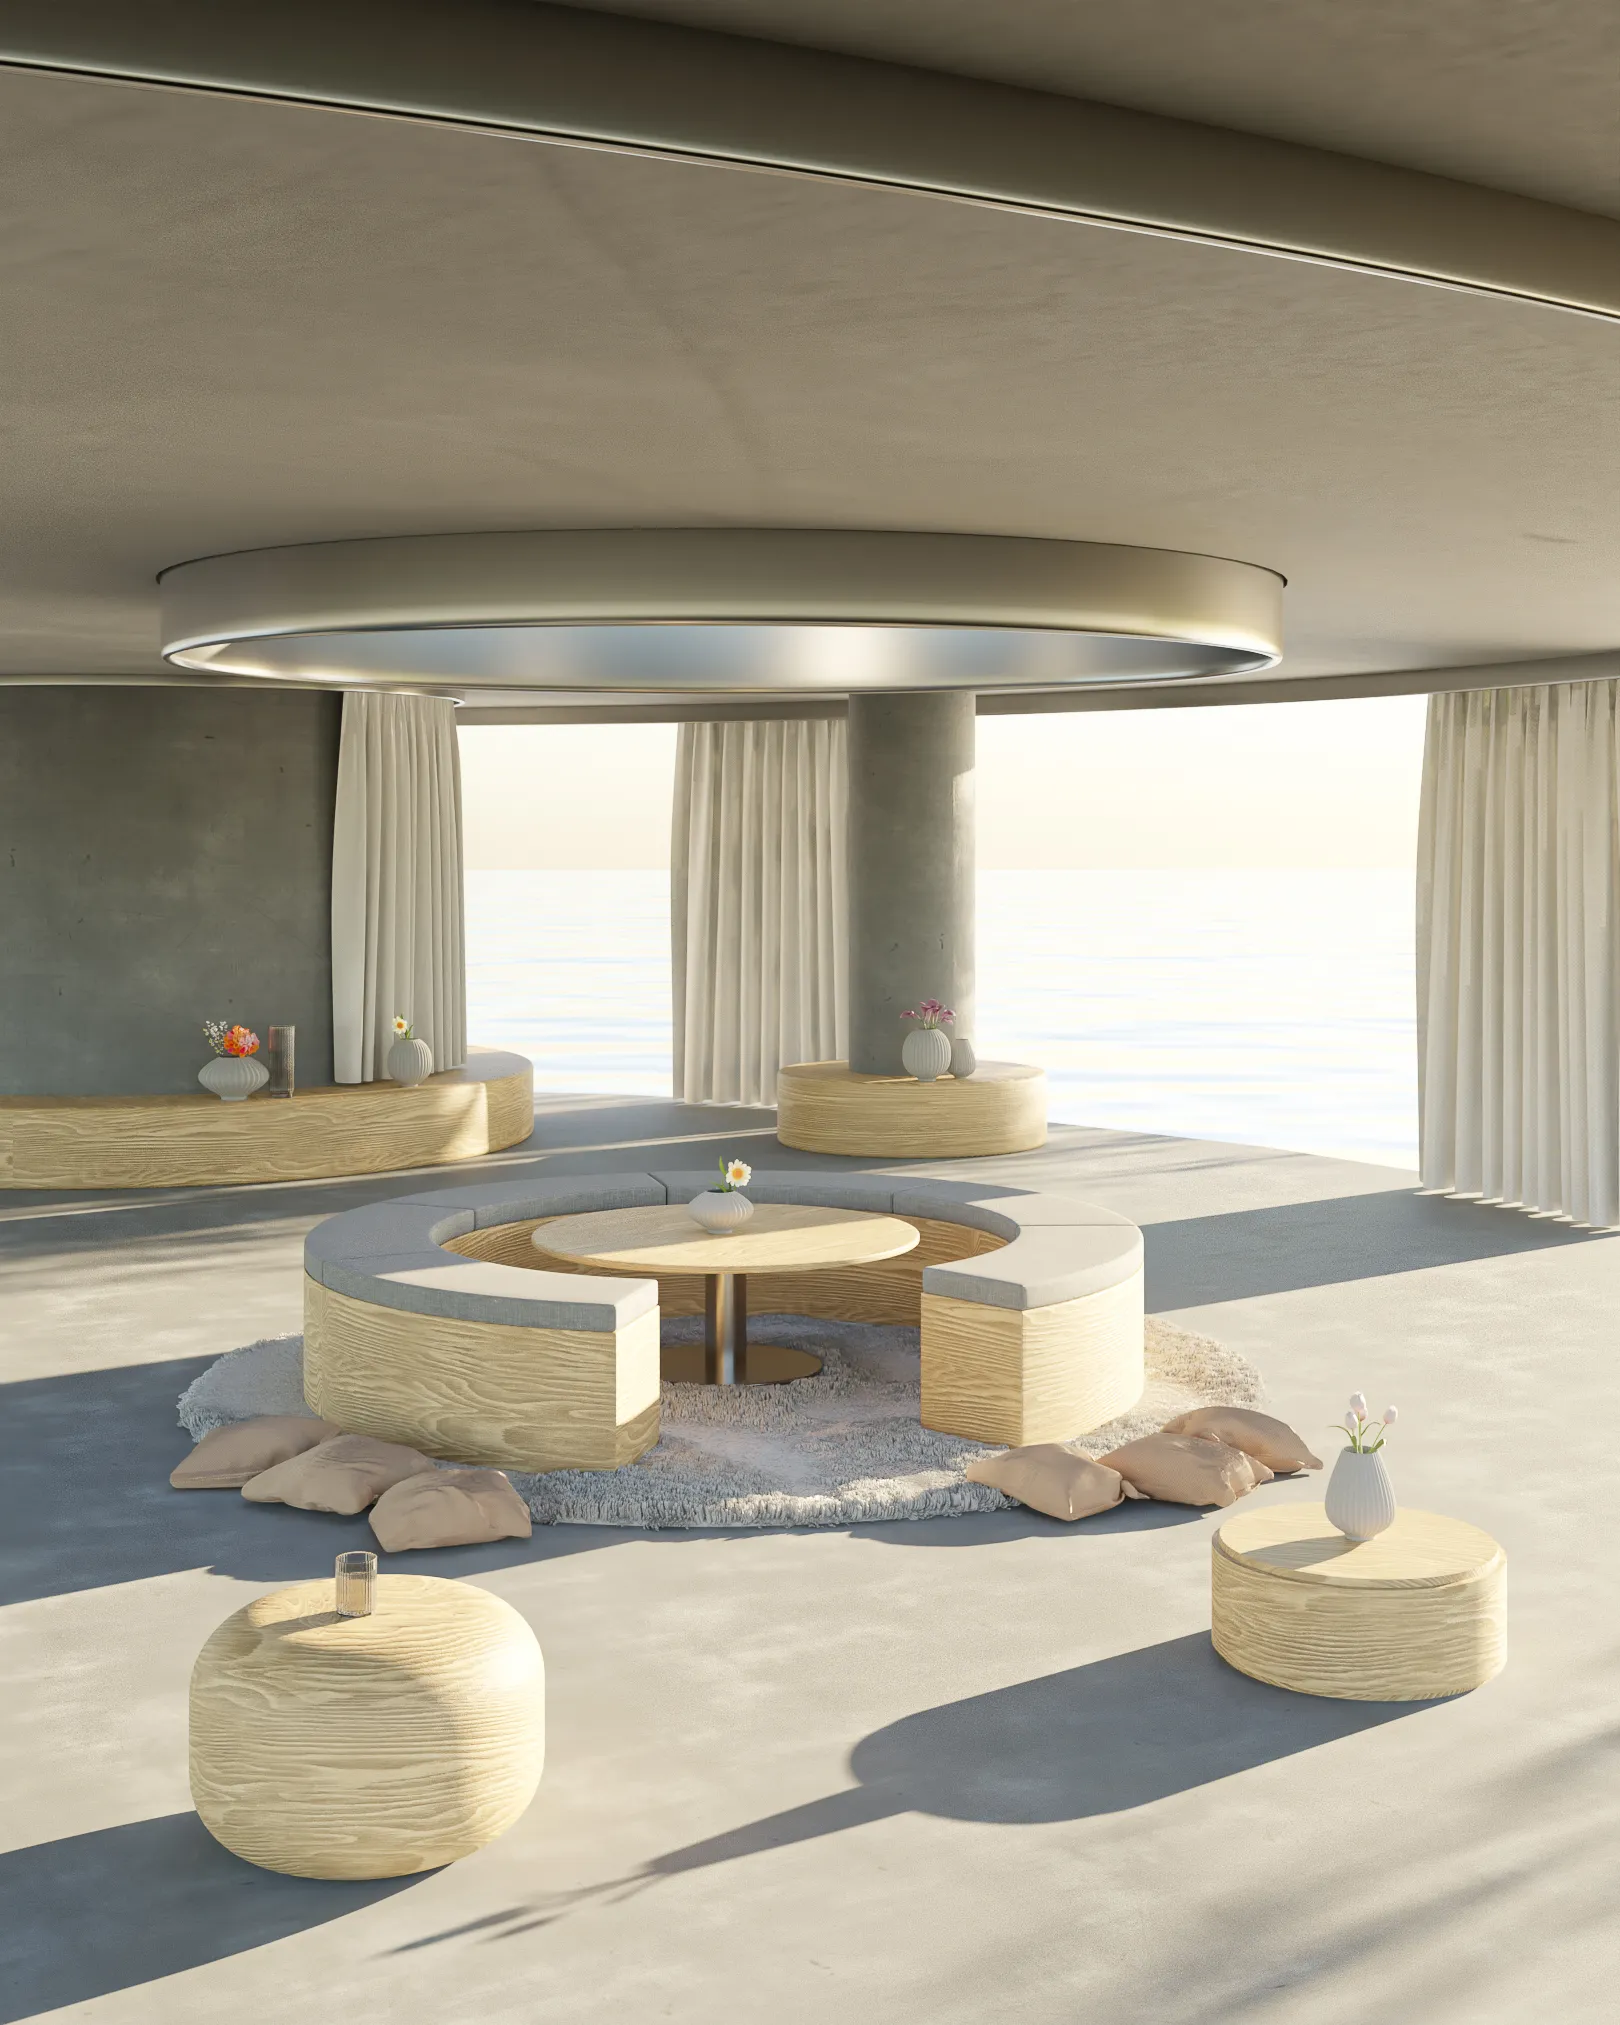 A 3d model of a living room with a circular table and chairs.